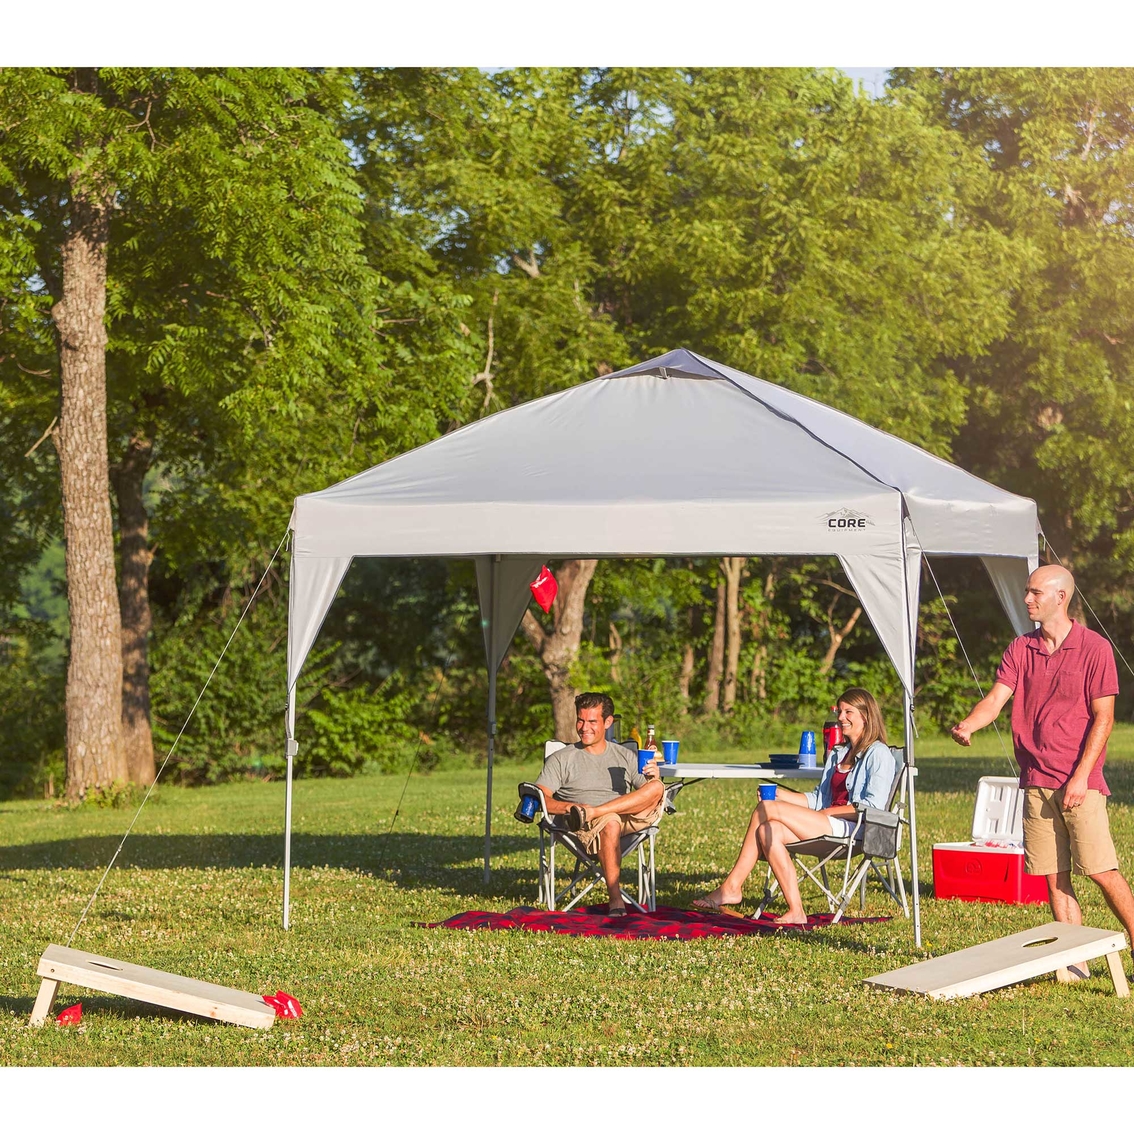 Core Equipment 10 x 10 ft. Instant Canopy - Image 7 of 7